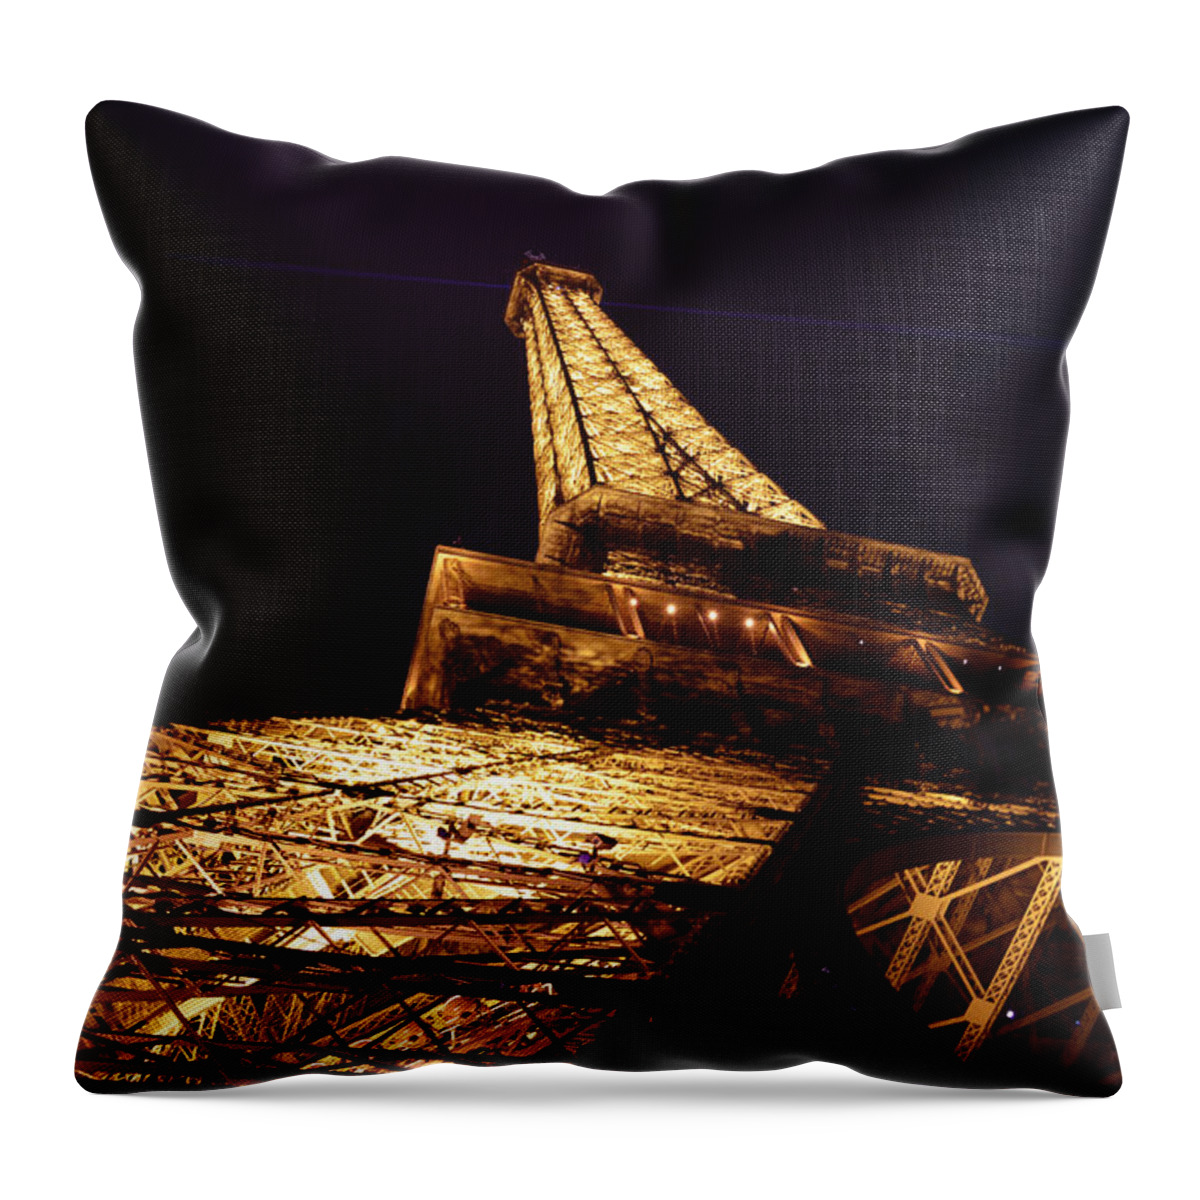 Landmark Eiffel Tower Paris France At Night Photography Throw Pillow featuring the photograph Eiffel Tower Paris France by Patricia Awapara